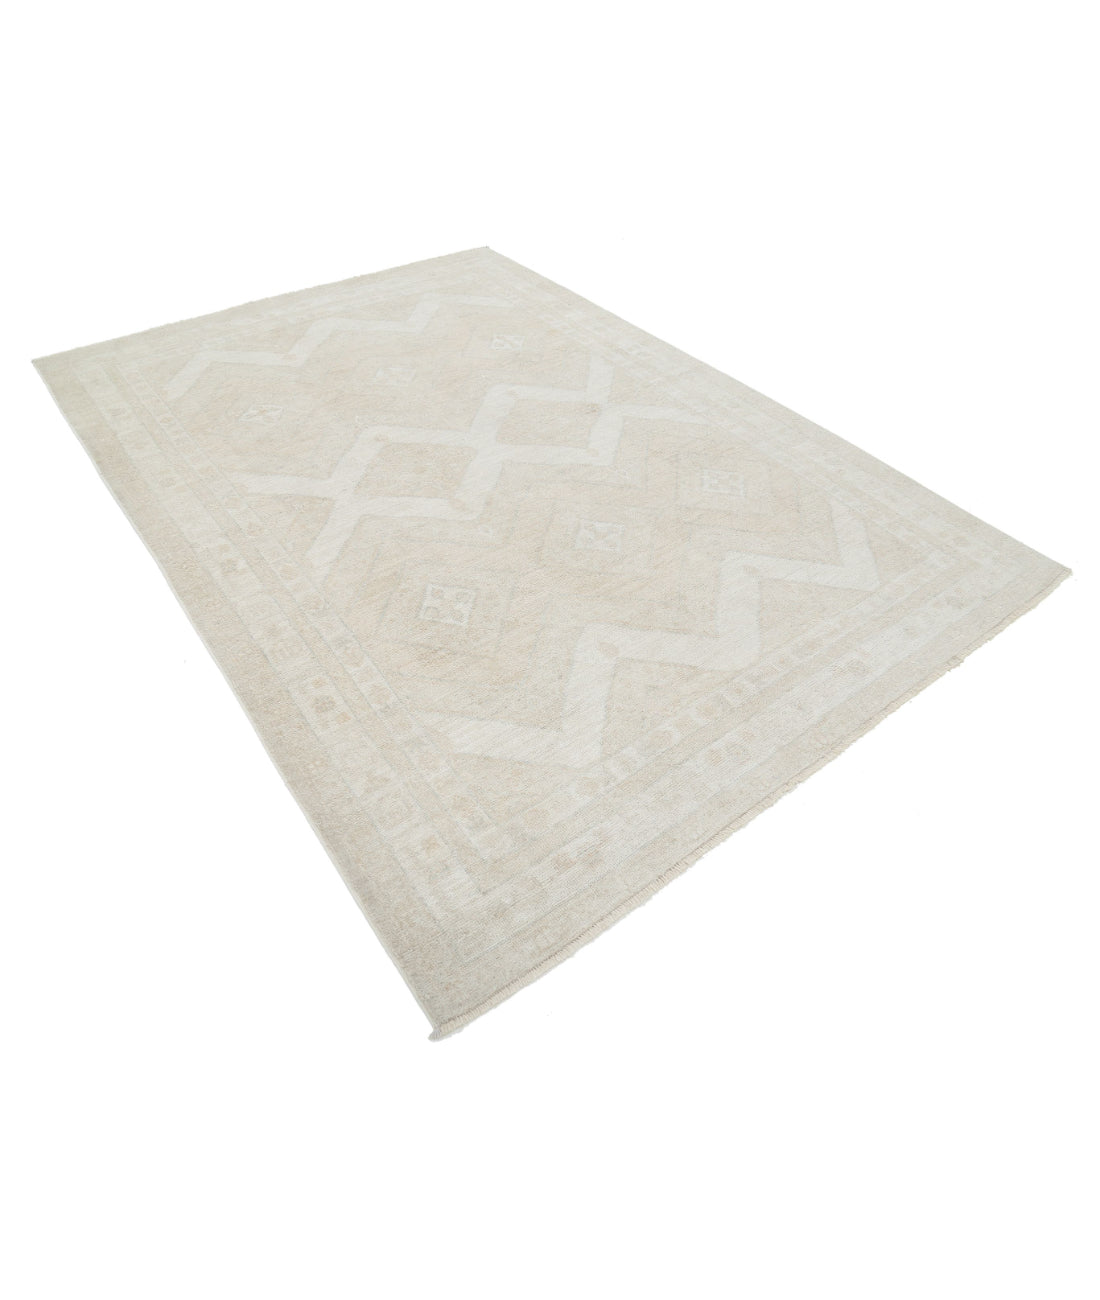 Hand Knotted Oushak Wool Rug - 6'2'' x 8'10'' 6'2'' x 8'10'' (185 X 265) / Taupe / Ivory